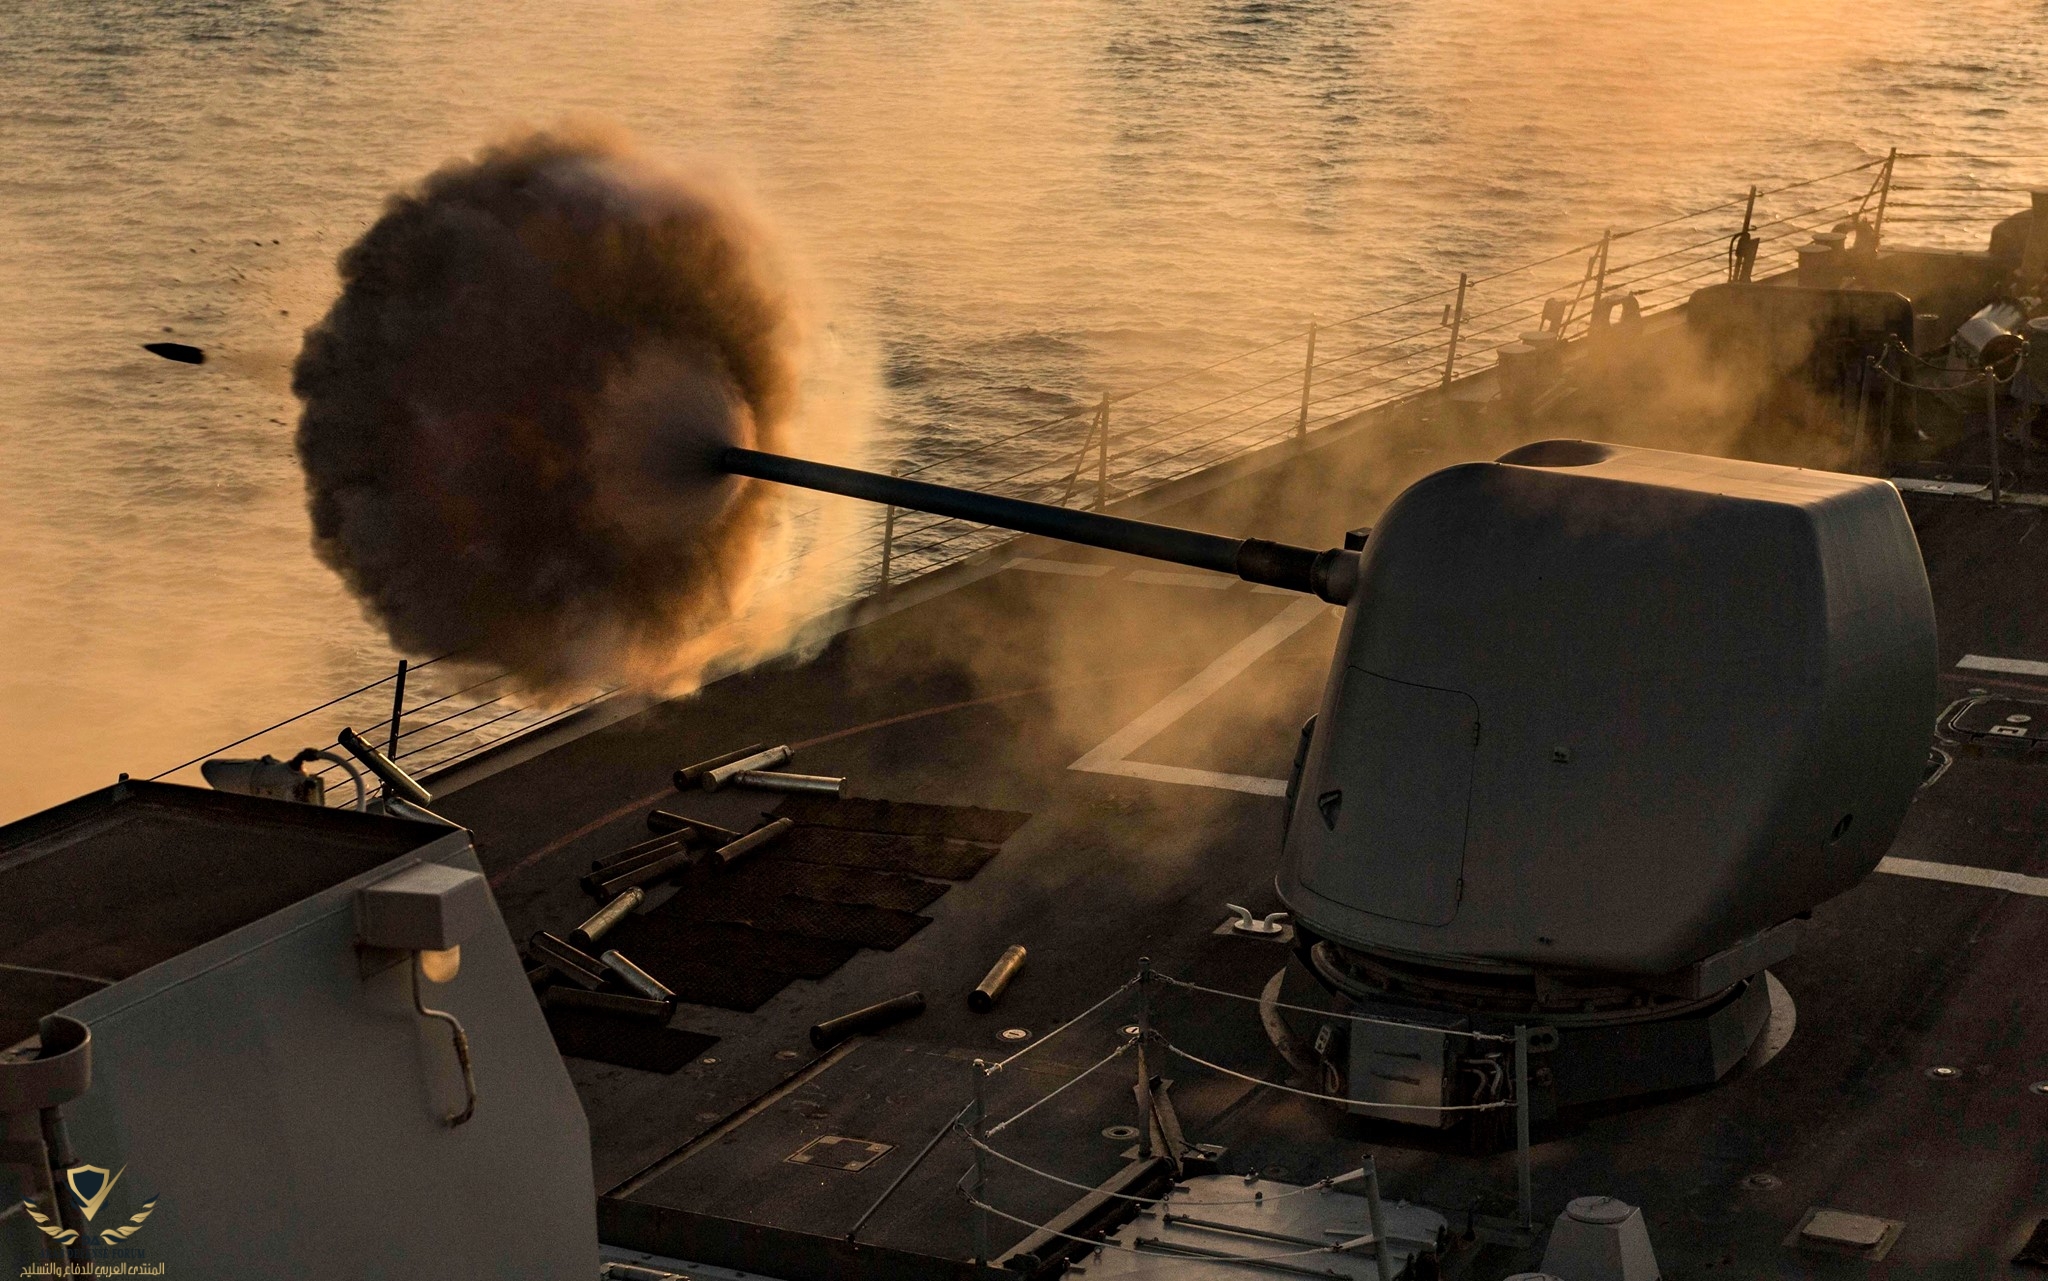 The Arleigh Burke-class guided missile destroyer USS Carney DDG 64 fires its 5inch gun during ...jpg